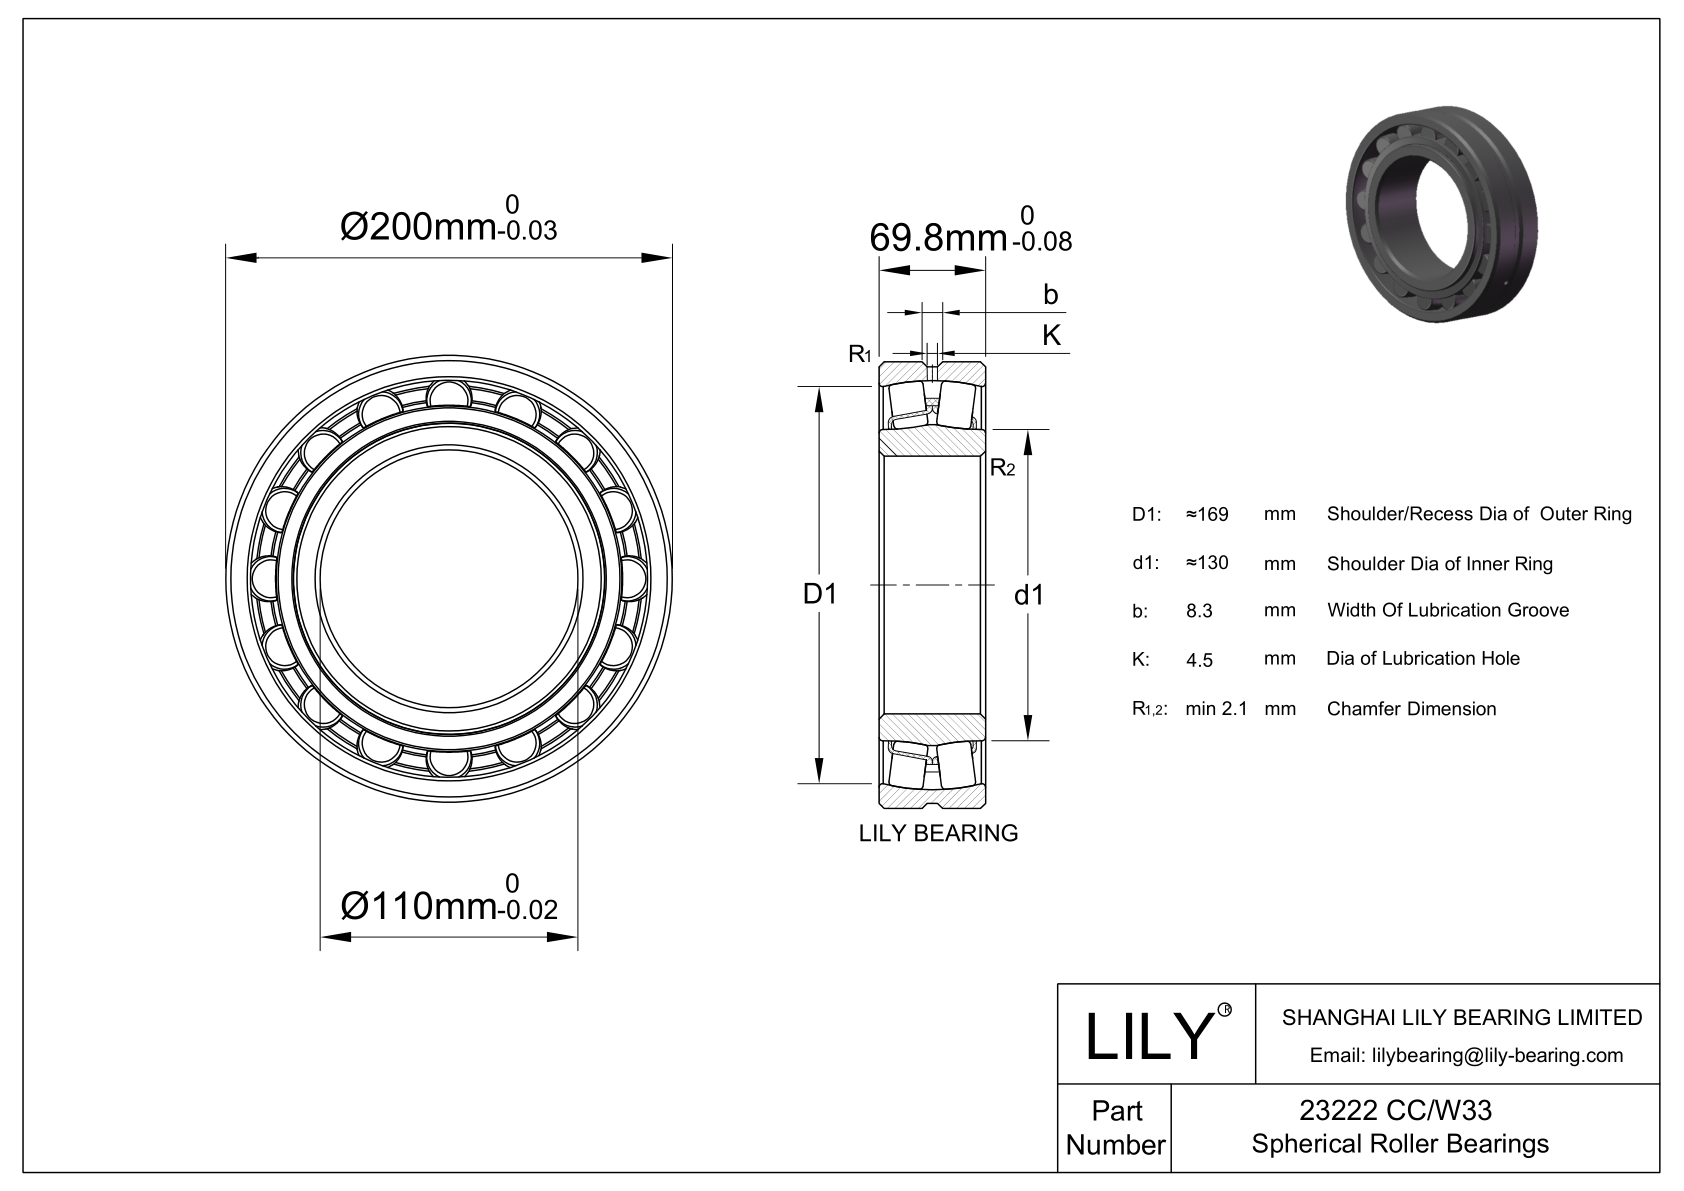 23222 CC/W33 Double Row Spherical Roller Bearing cad drawing